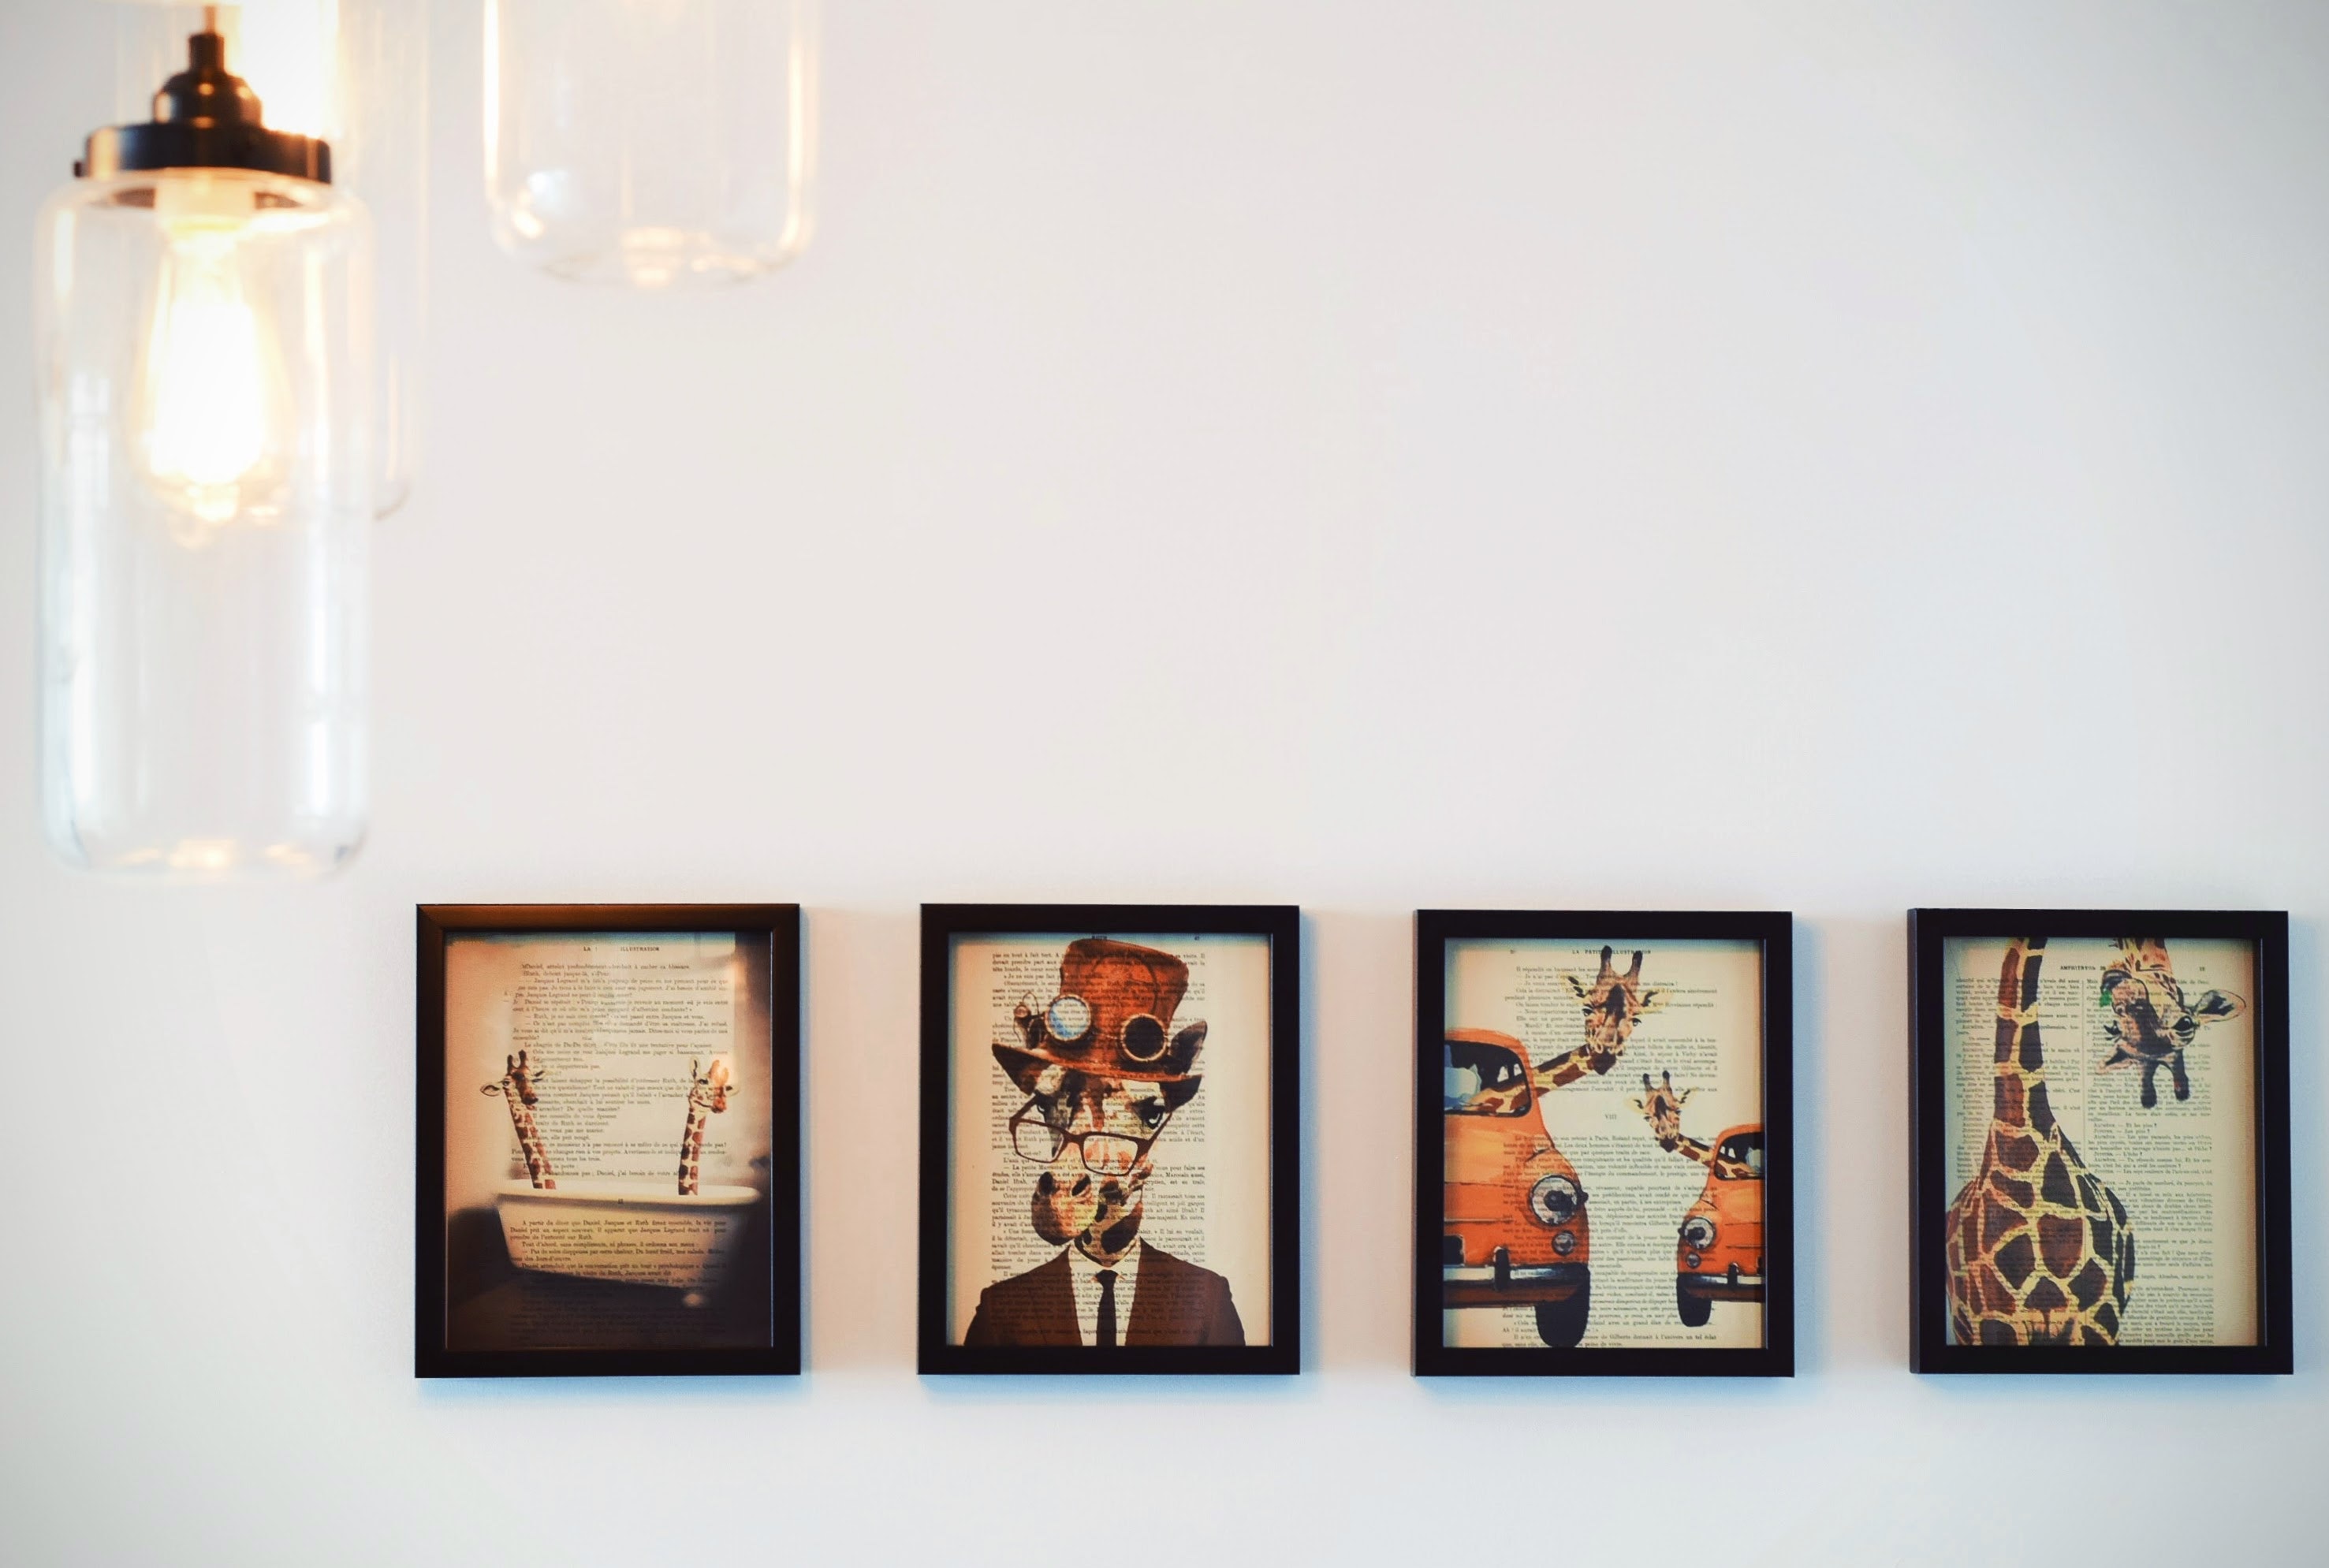 Photo by Tim Gouw: https://www.pexels.com/photo/four-paintings-on-wall-139764/